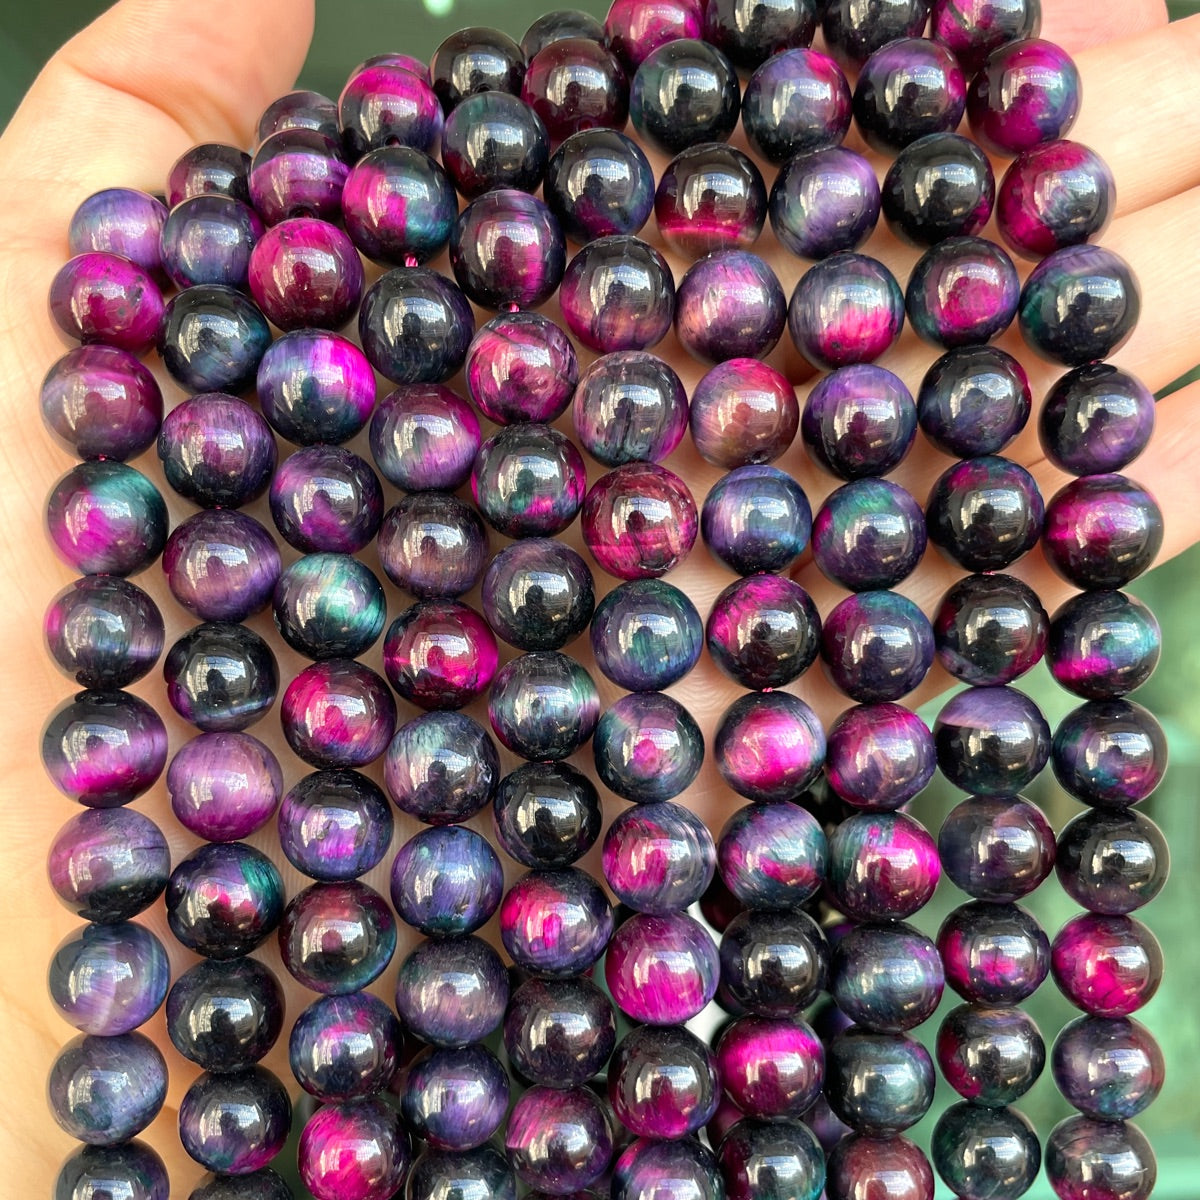 10mm Natural Hot Pink Dark Blue Galaxy Tiger Eye Round Stone Beads Stone Beads New Beads Arrivals Tiger Eye Beads Charms Beads Beyond